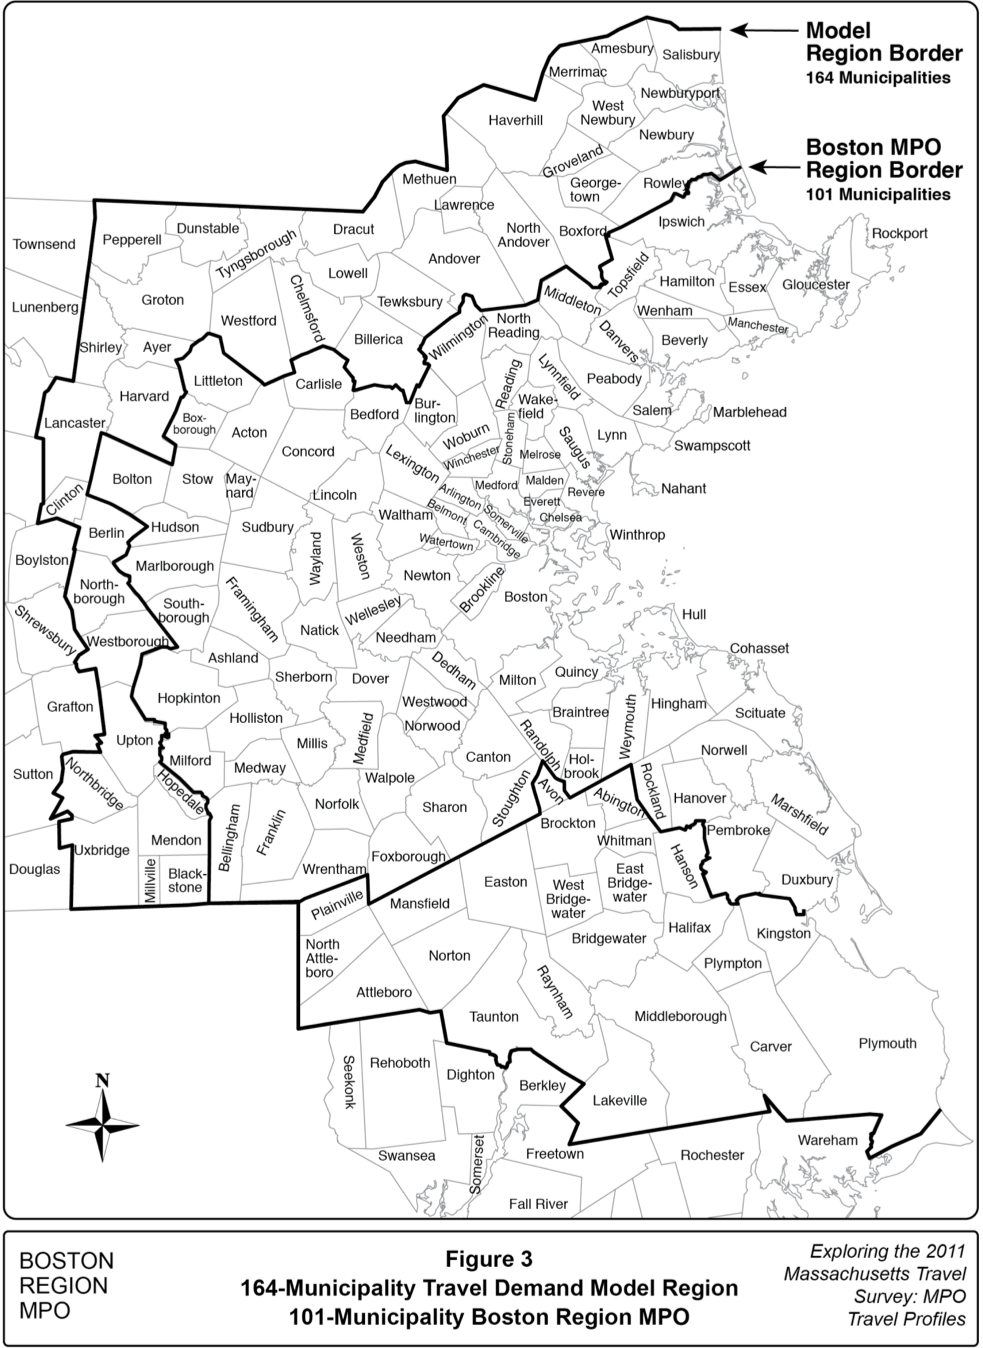 Figure 3 is a map of 164 municipalities in eastern Massachusetts. The 101 municipalities in the Boston Region MPO’s planning area are outlined, as well as the 63 other municipalities that are included in the MPO’s travel demand model region.